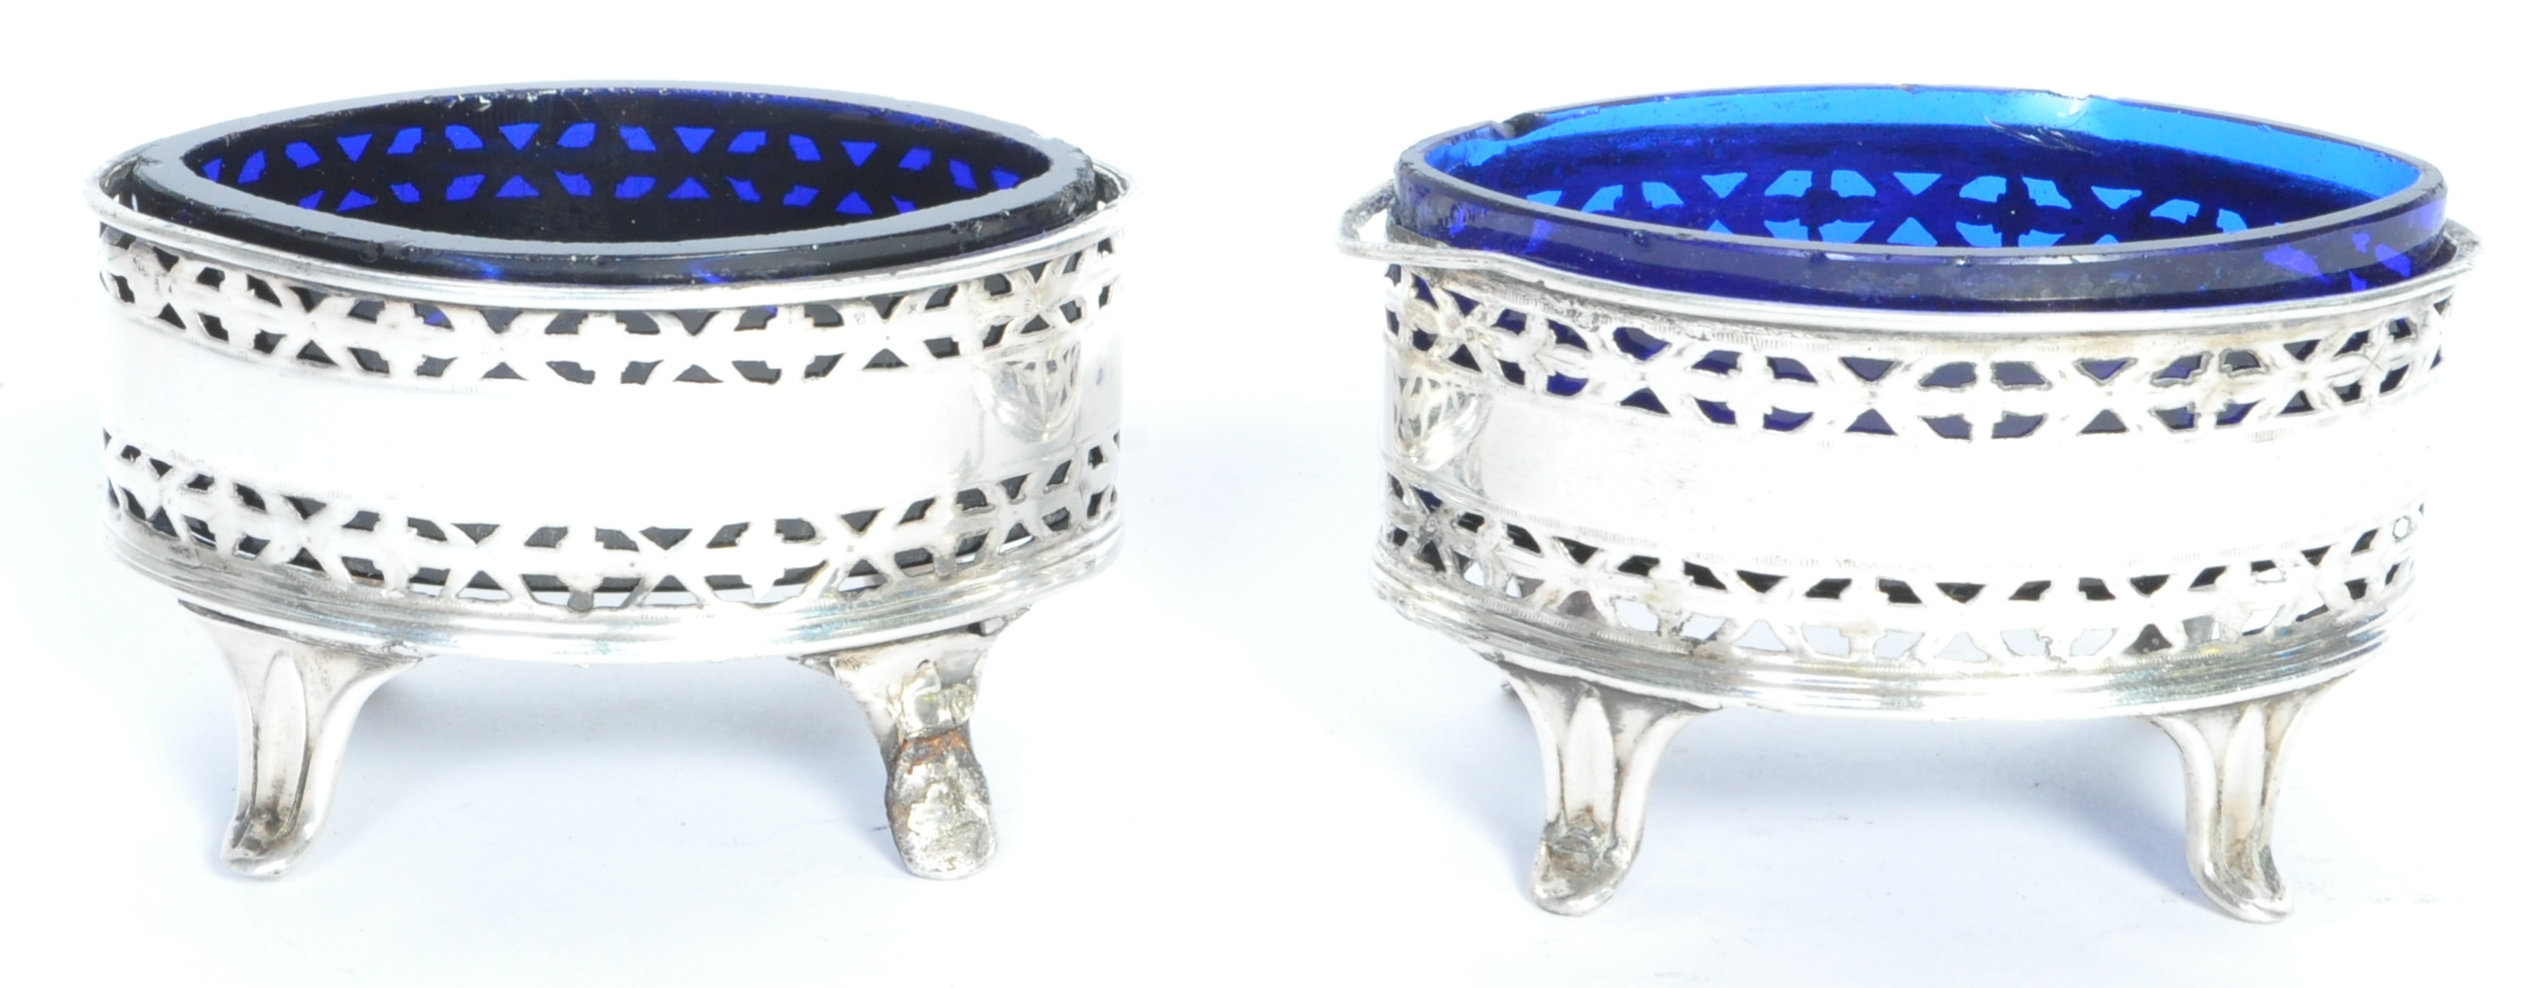 PAIR OF 19TH CENTURY SILVER TABLE SALTS - BLUE GLASS LINERS - Image 3 of 7